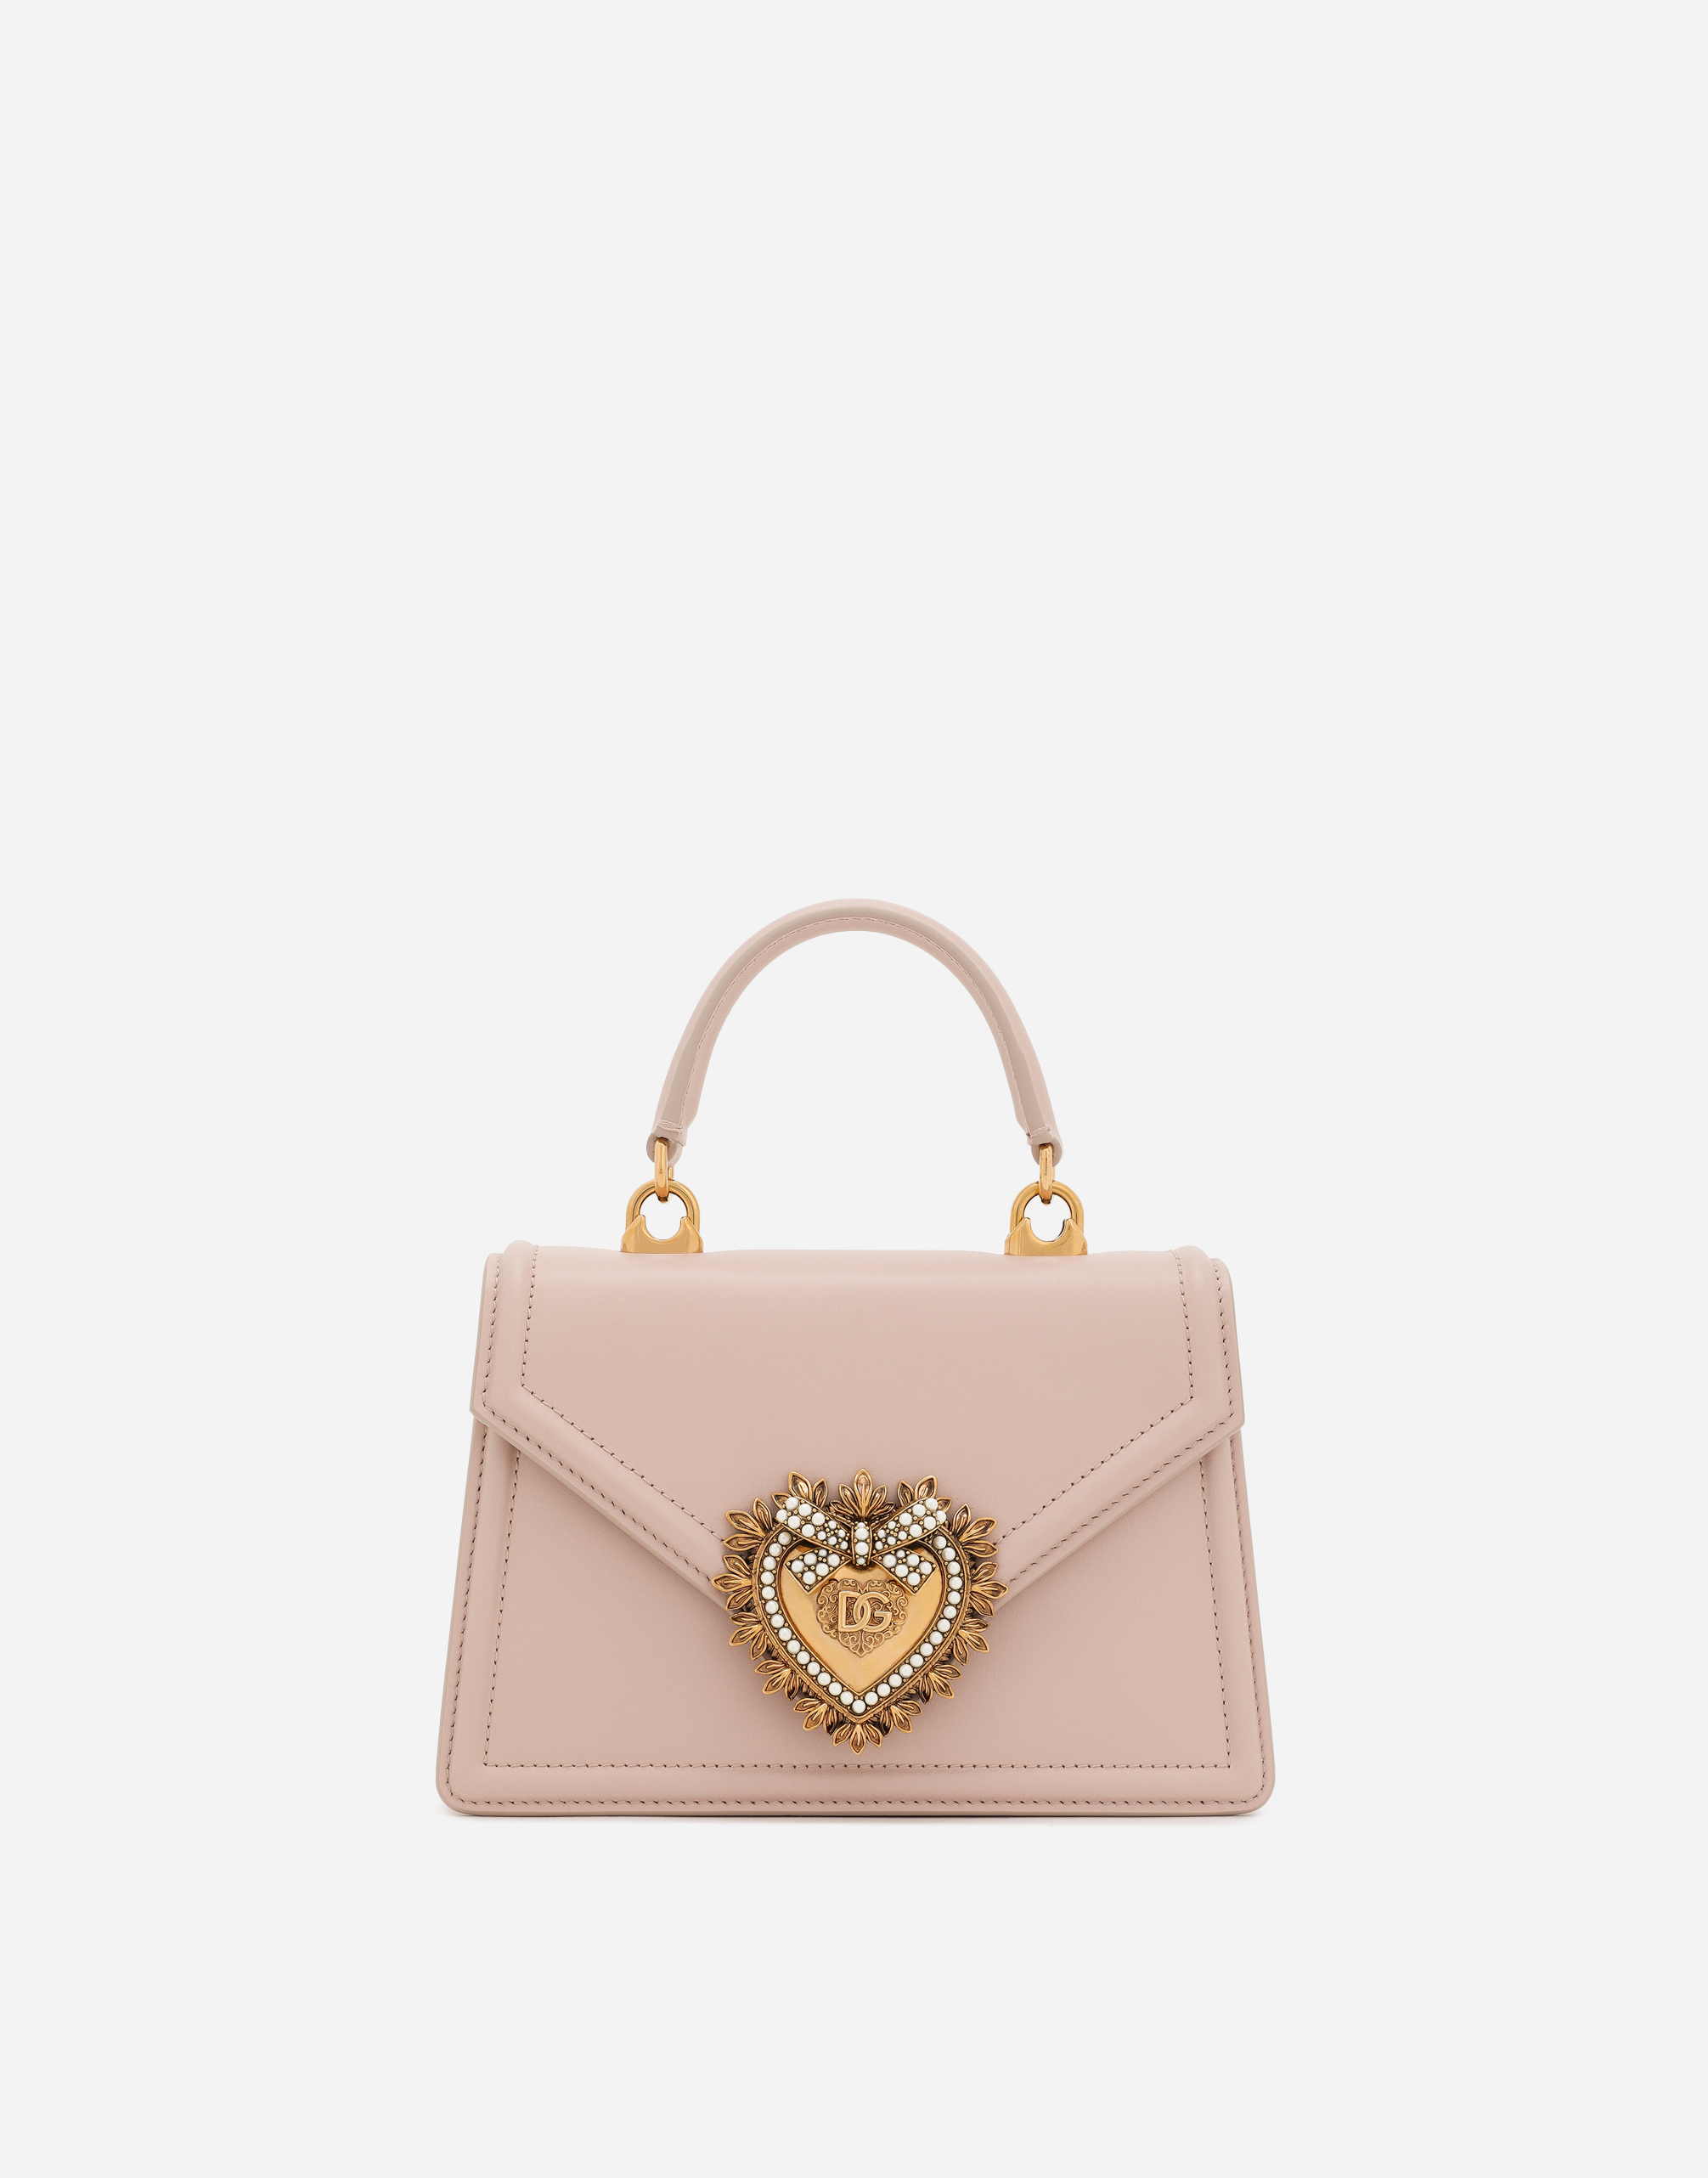 Small Devotion top-handle bag in Pale Pink